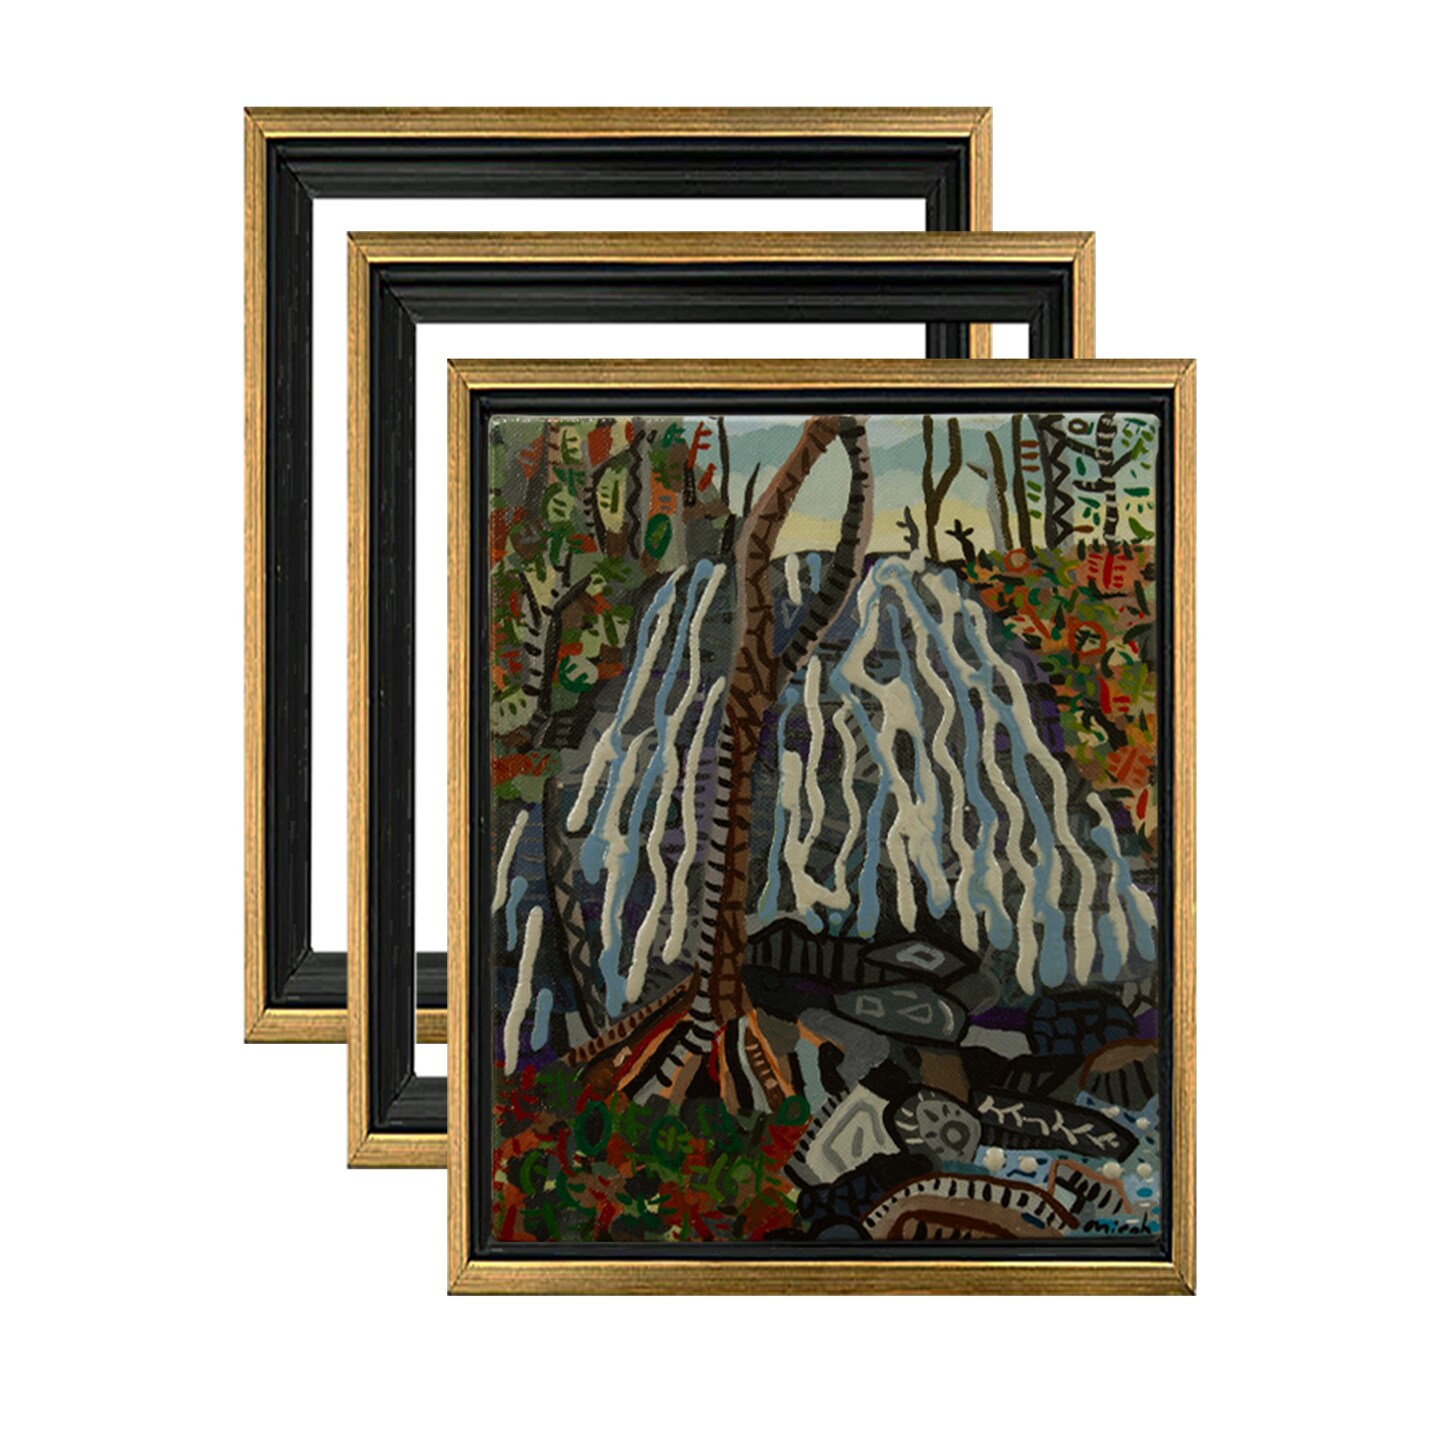 Cardinali Renewal Core Floater 3/4&#x22; Canvas Frame - 1-1/2&#x22; Deep Gallery Presentation Frames with Floating Effect for Canvas Art - Antique Gold, Set of 3 - 12 x 12 Inch Floater Frames